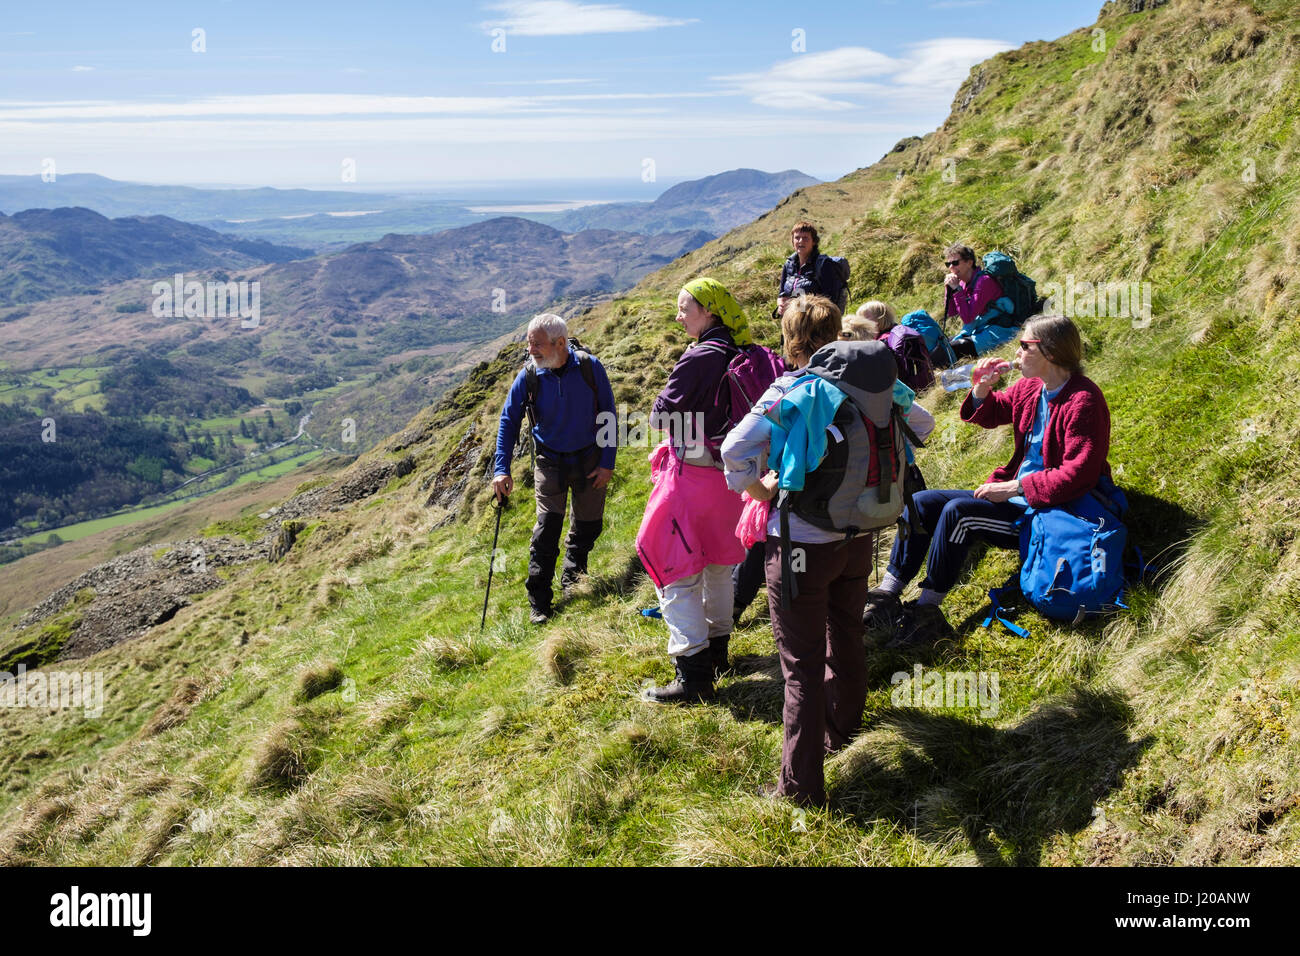 Hikers resting and looking at view on slopes of Y Lliwedd mountain in mountains of Snowdonia National Park. Gwynedd, Wales, UK, Britain Stock Photo